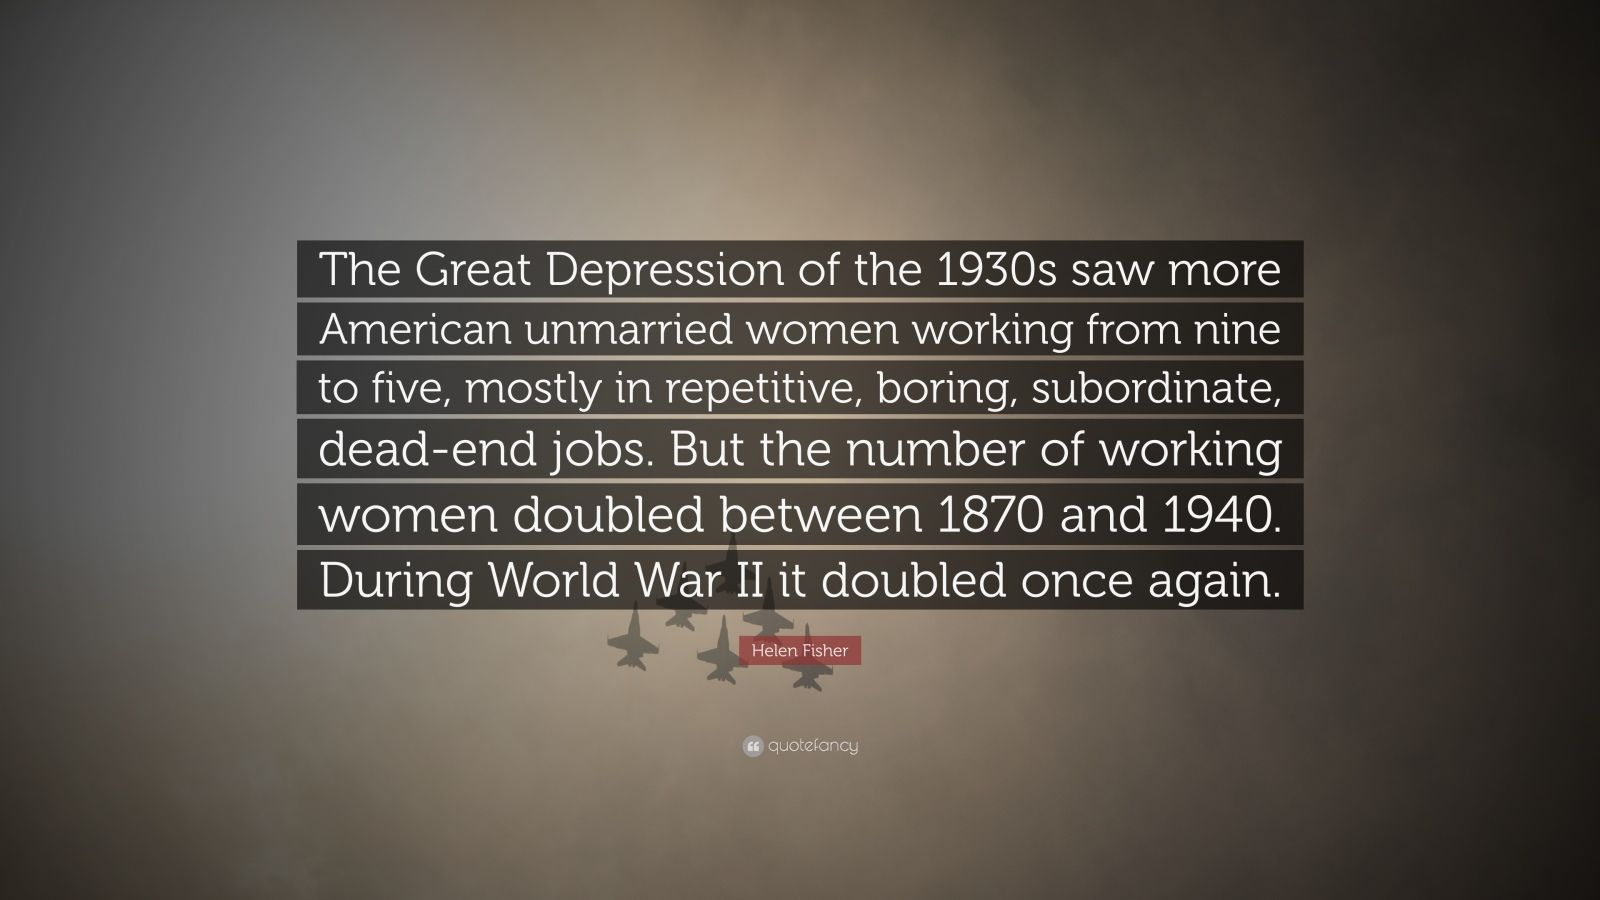 Helen Fisher Quote: “The Great Depression of the s saw more